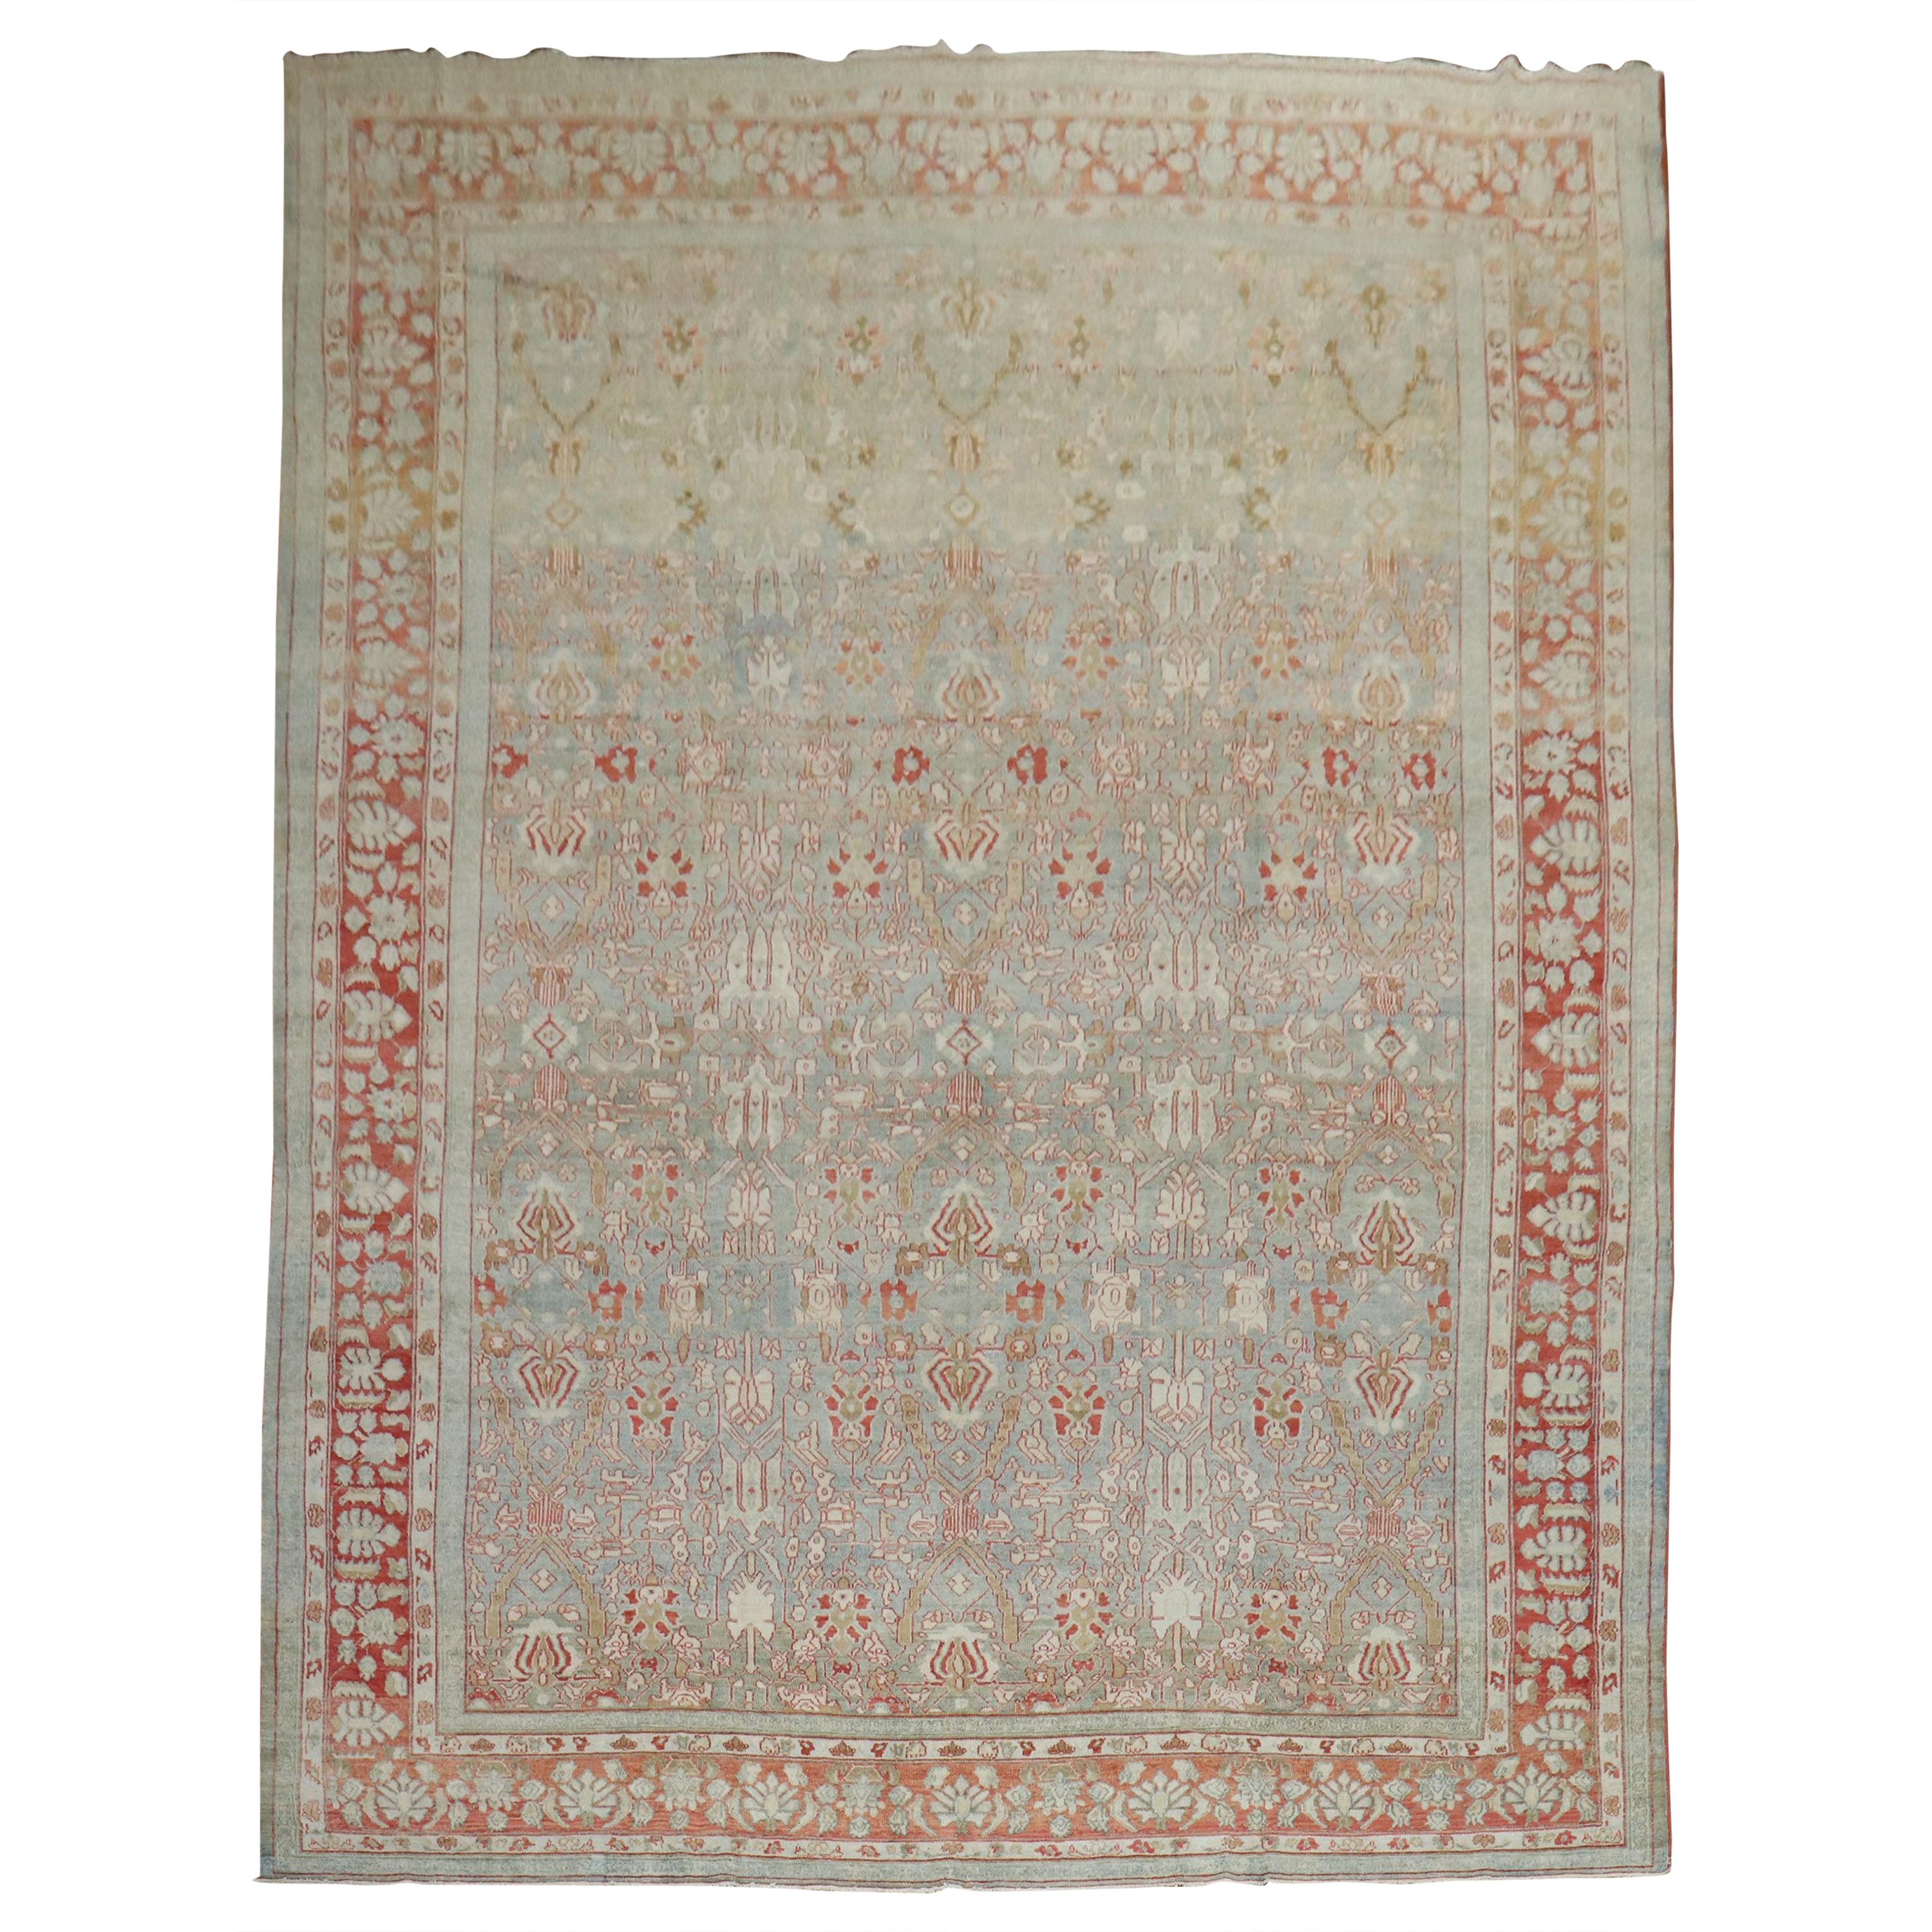 Decorative Oversize Gray Blue Persian Bibikabad Rug, Early 20th Century For Sale